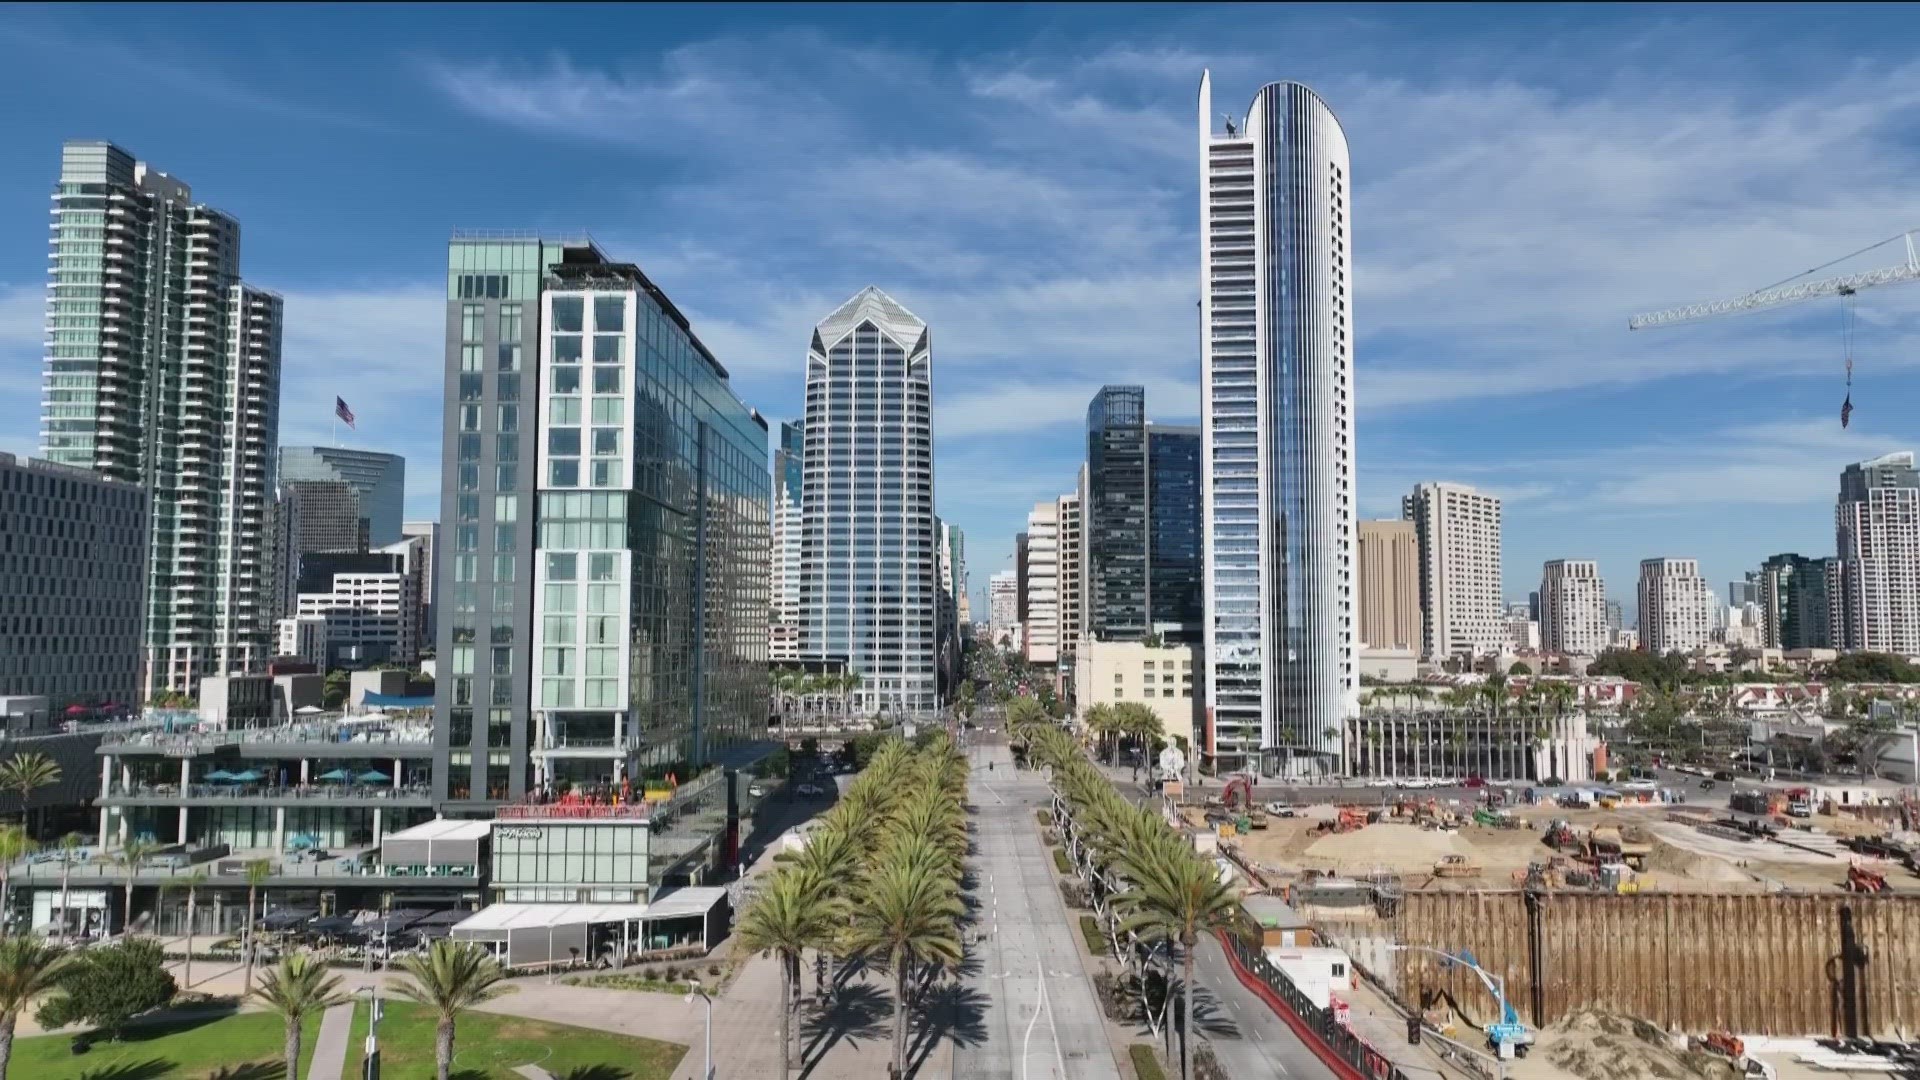 “We're the number two industry here in San Diego. There's a lot that rides on visitors that come to San Diego,” said The San Diego Tourism Authority.